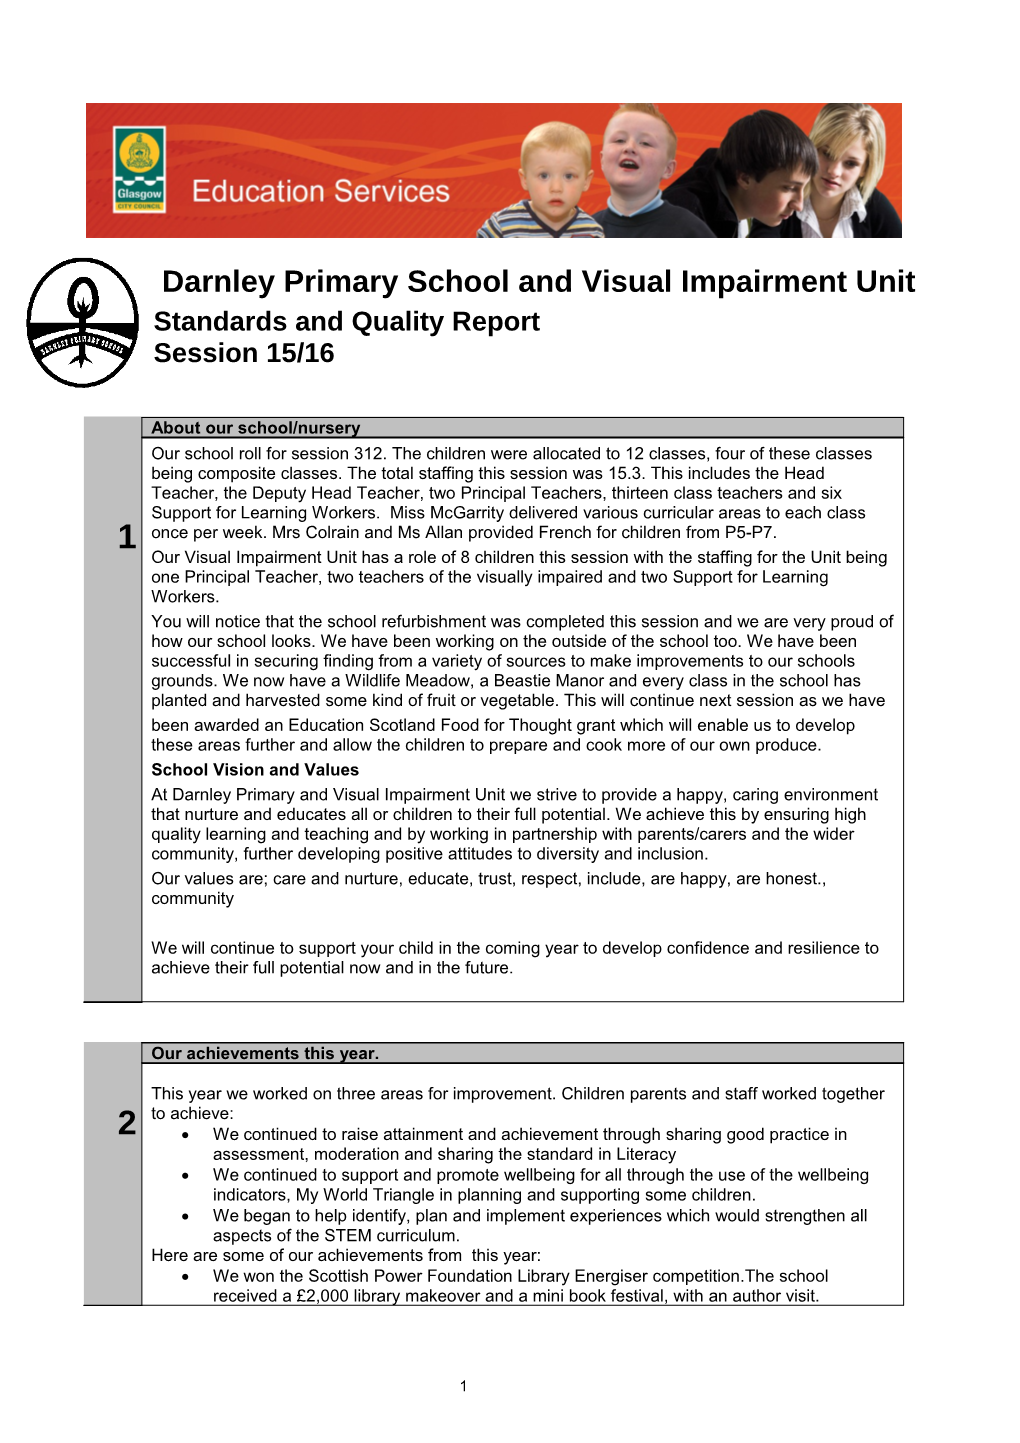 Darnley Primary School and Visual Impairment Unit